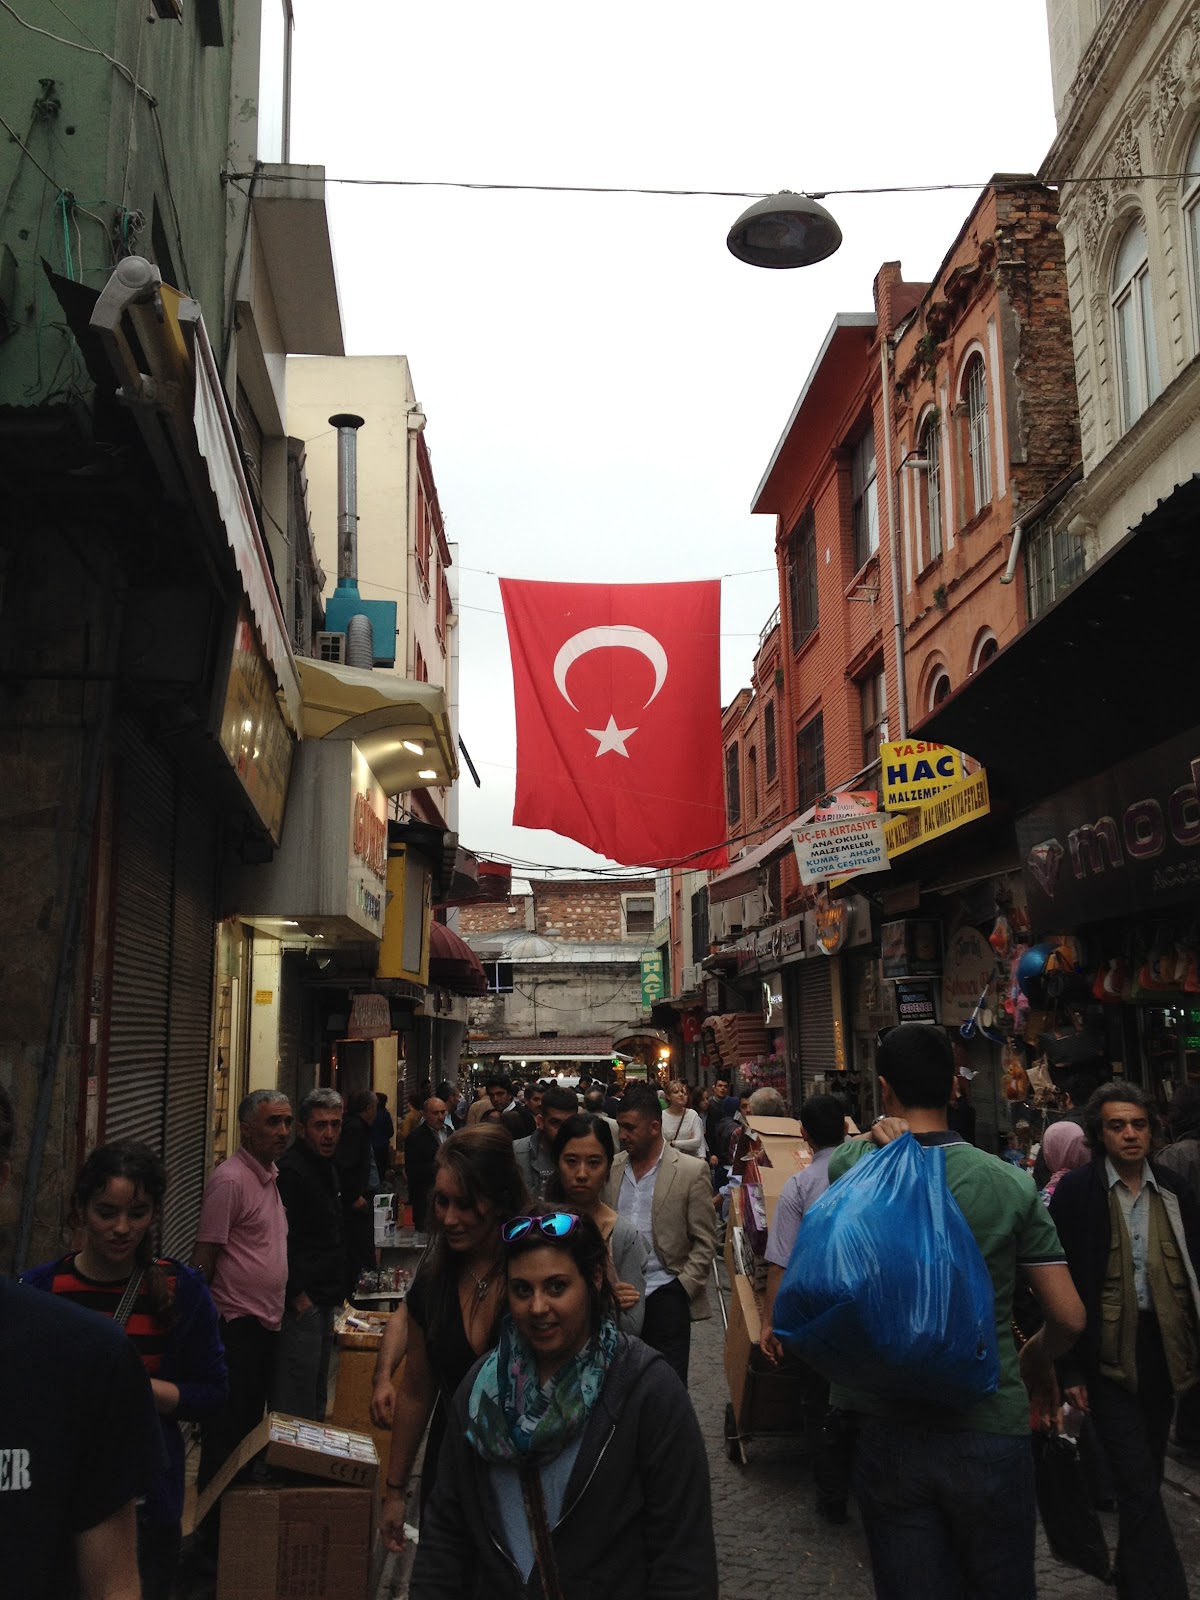 Market place, people are buying and walking in the market and a Turkey flag can be seen. 